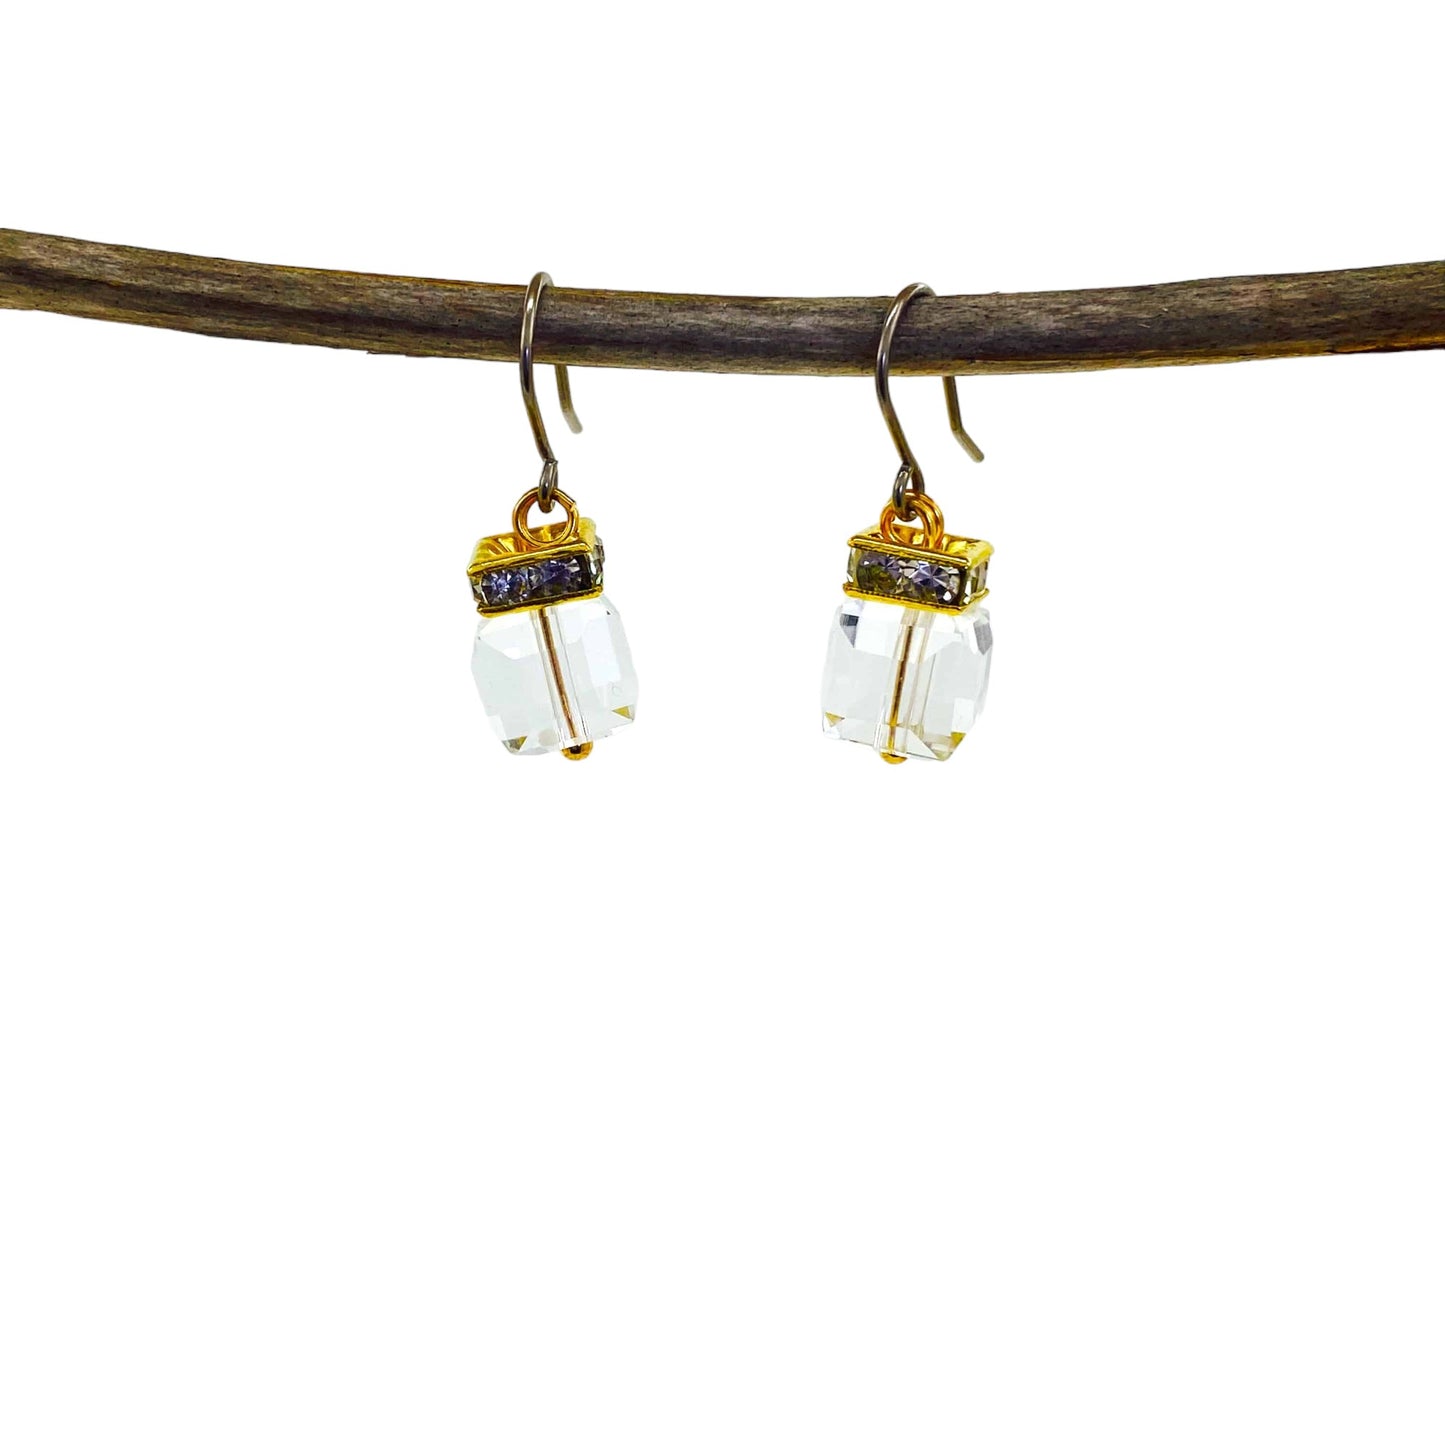 Crystal Clutch earrings with titanium hooks. A flashing crystal with a gold on a branch